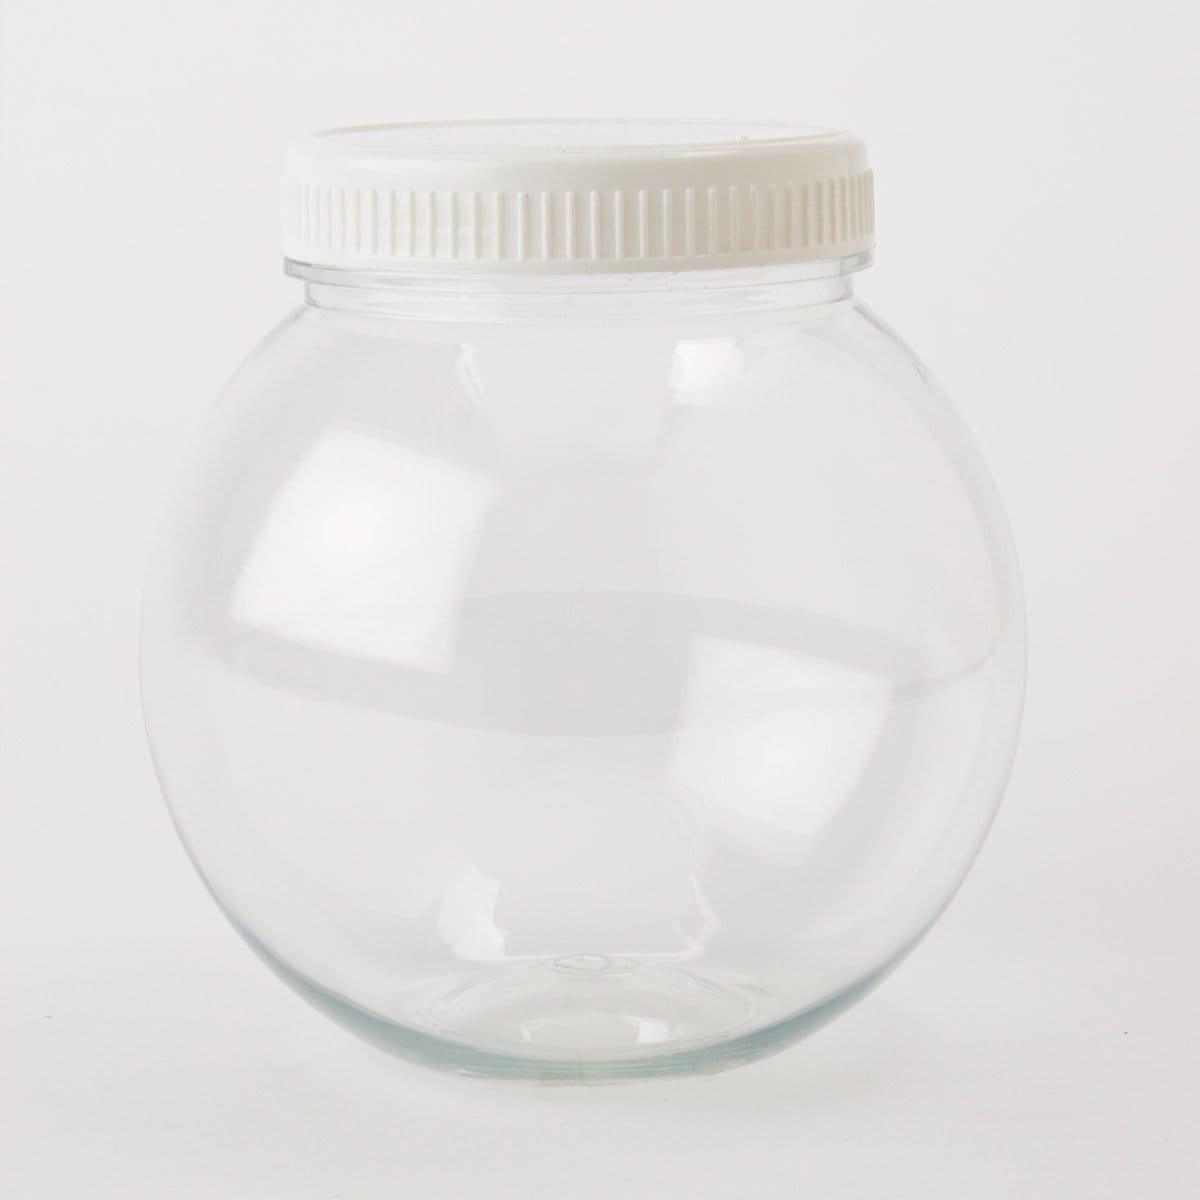 Buy Baby Shower White acrylic round jar with lid, 4 inches sold at Party Expert